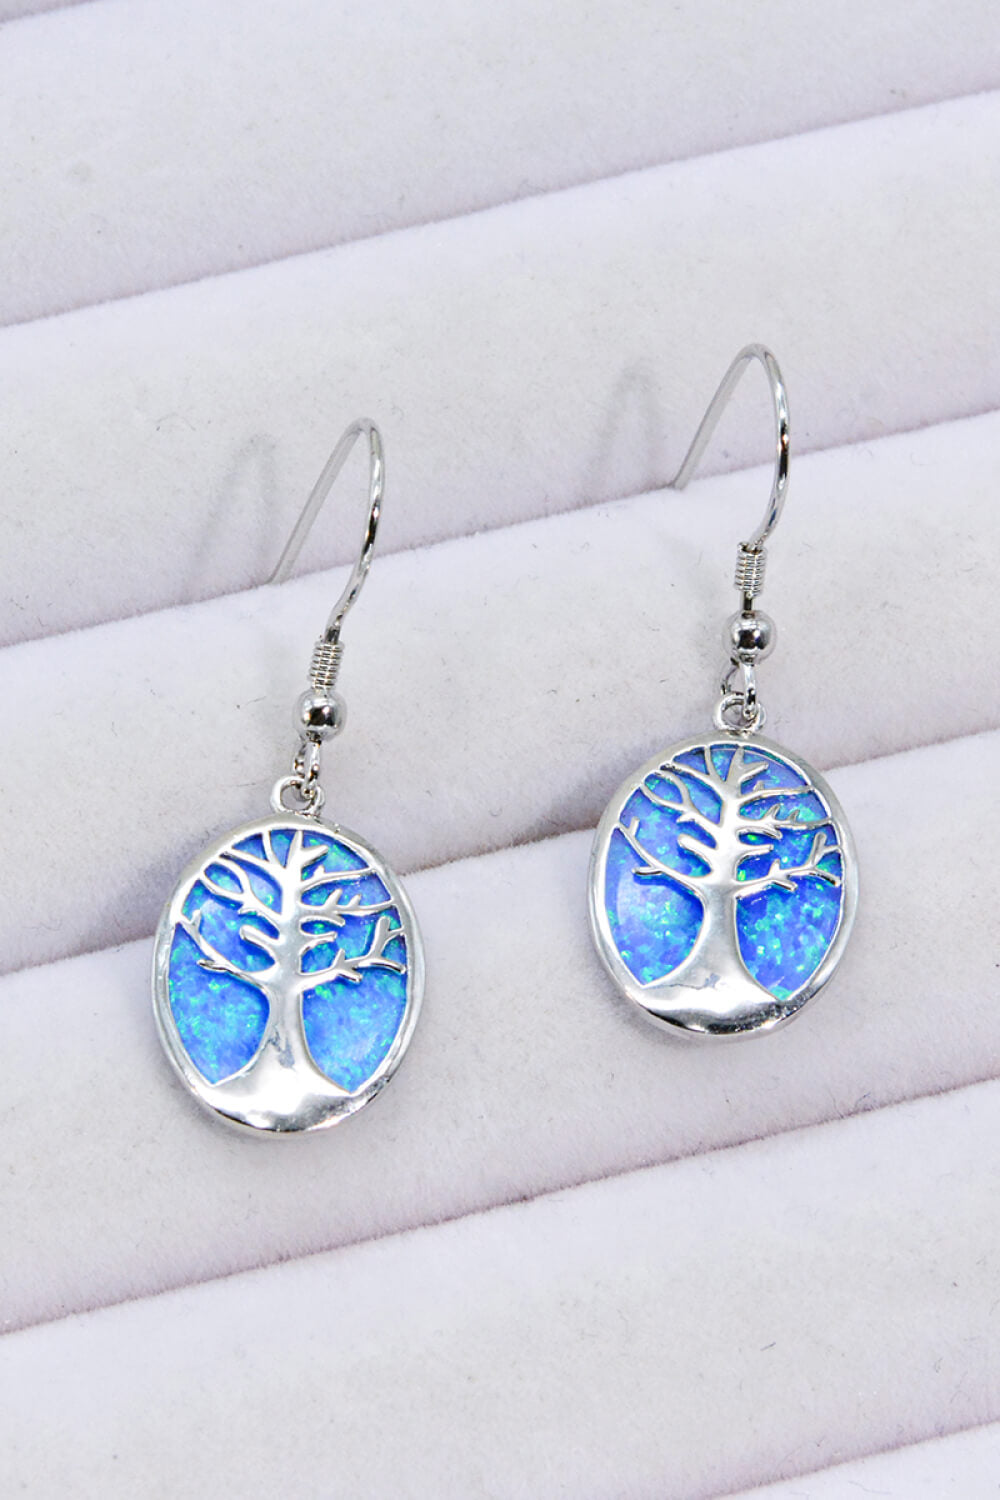 Opal Blue Platinum-Plated Drop Earrings - Tophatter Shopping Deals - Electronics, Jewelry, Auction, App, Bidding, Gadgets, Fashion